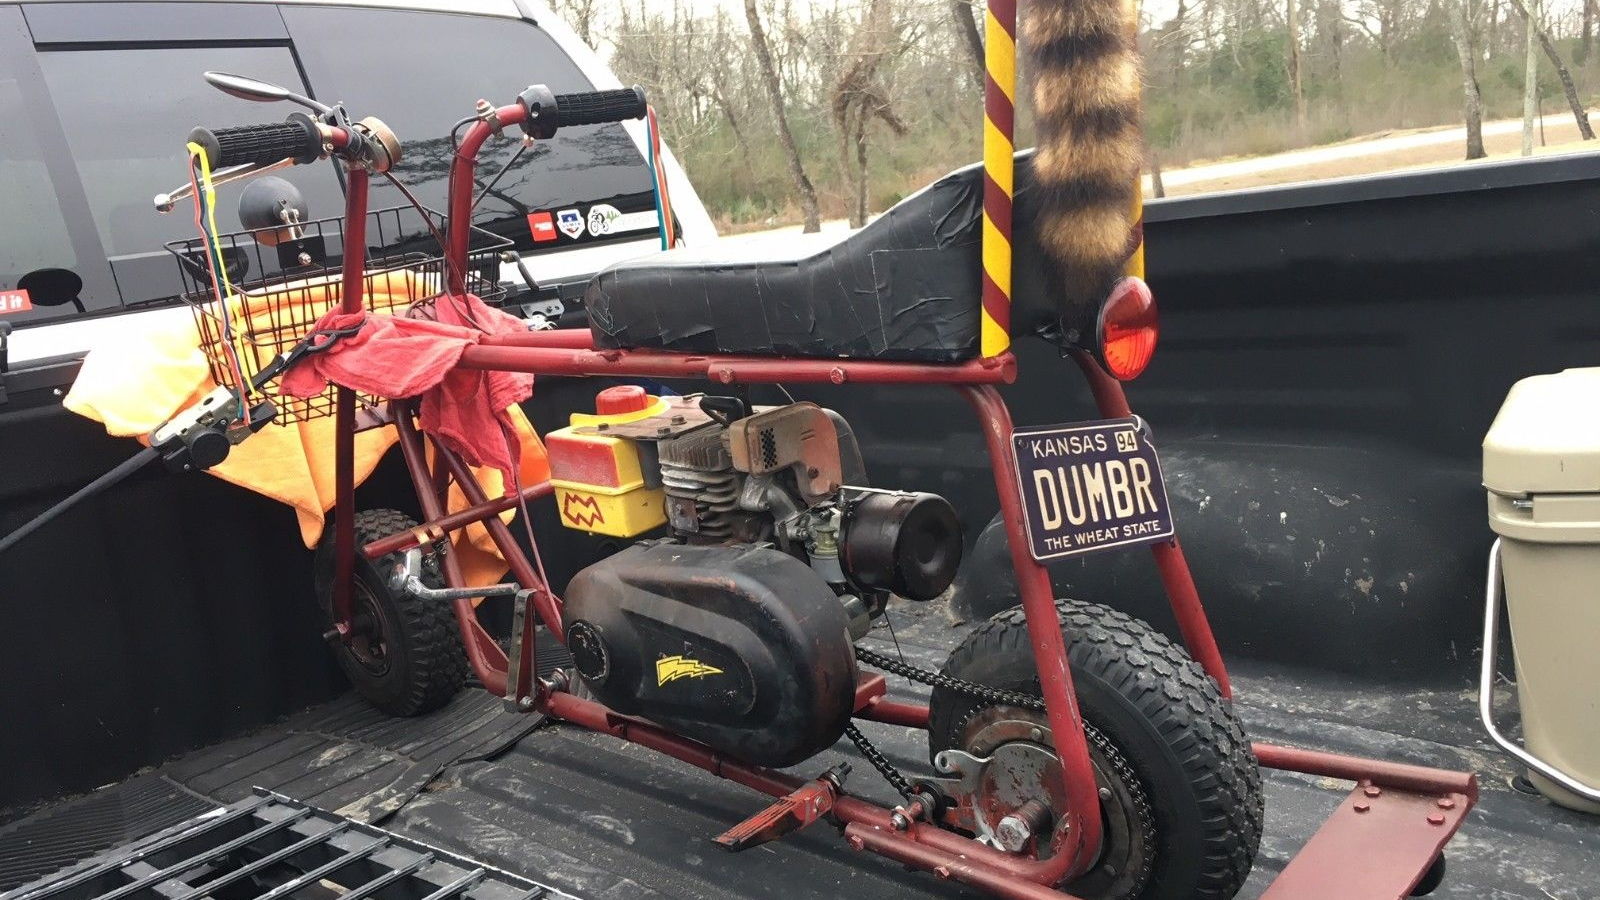 The original Dumb and Dumber mini bike is up for sale